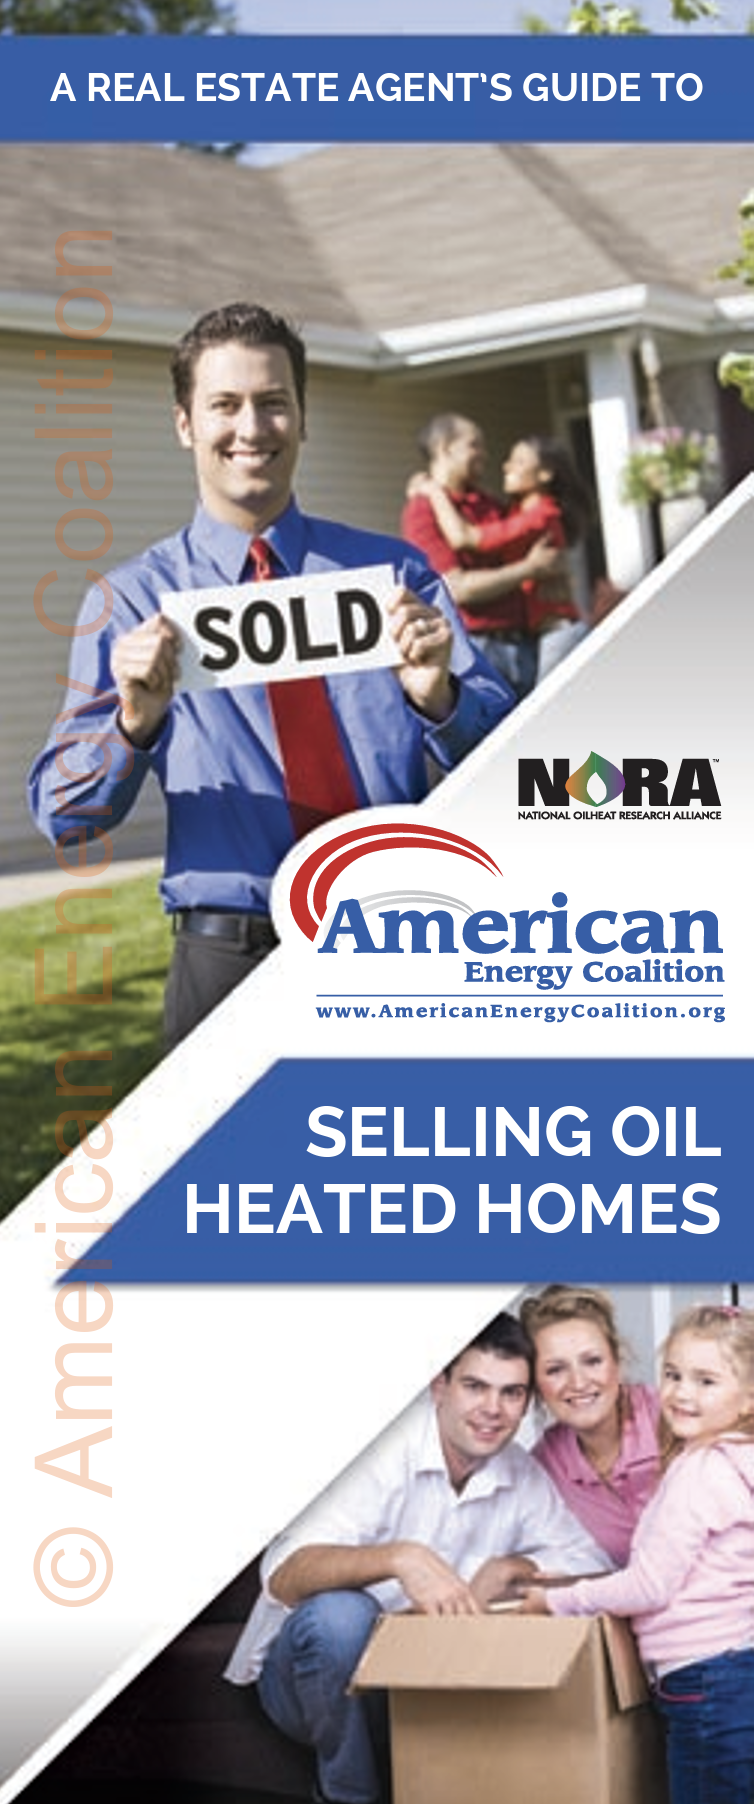 Realty Estate Agent's Guide to Selling Oil Heated Homes